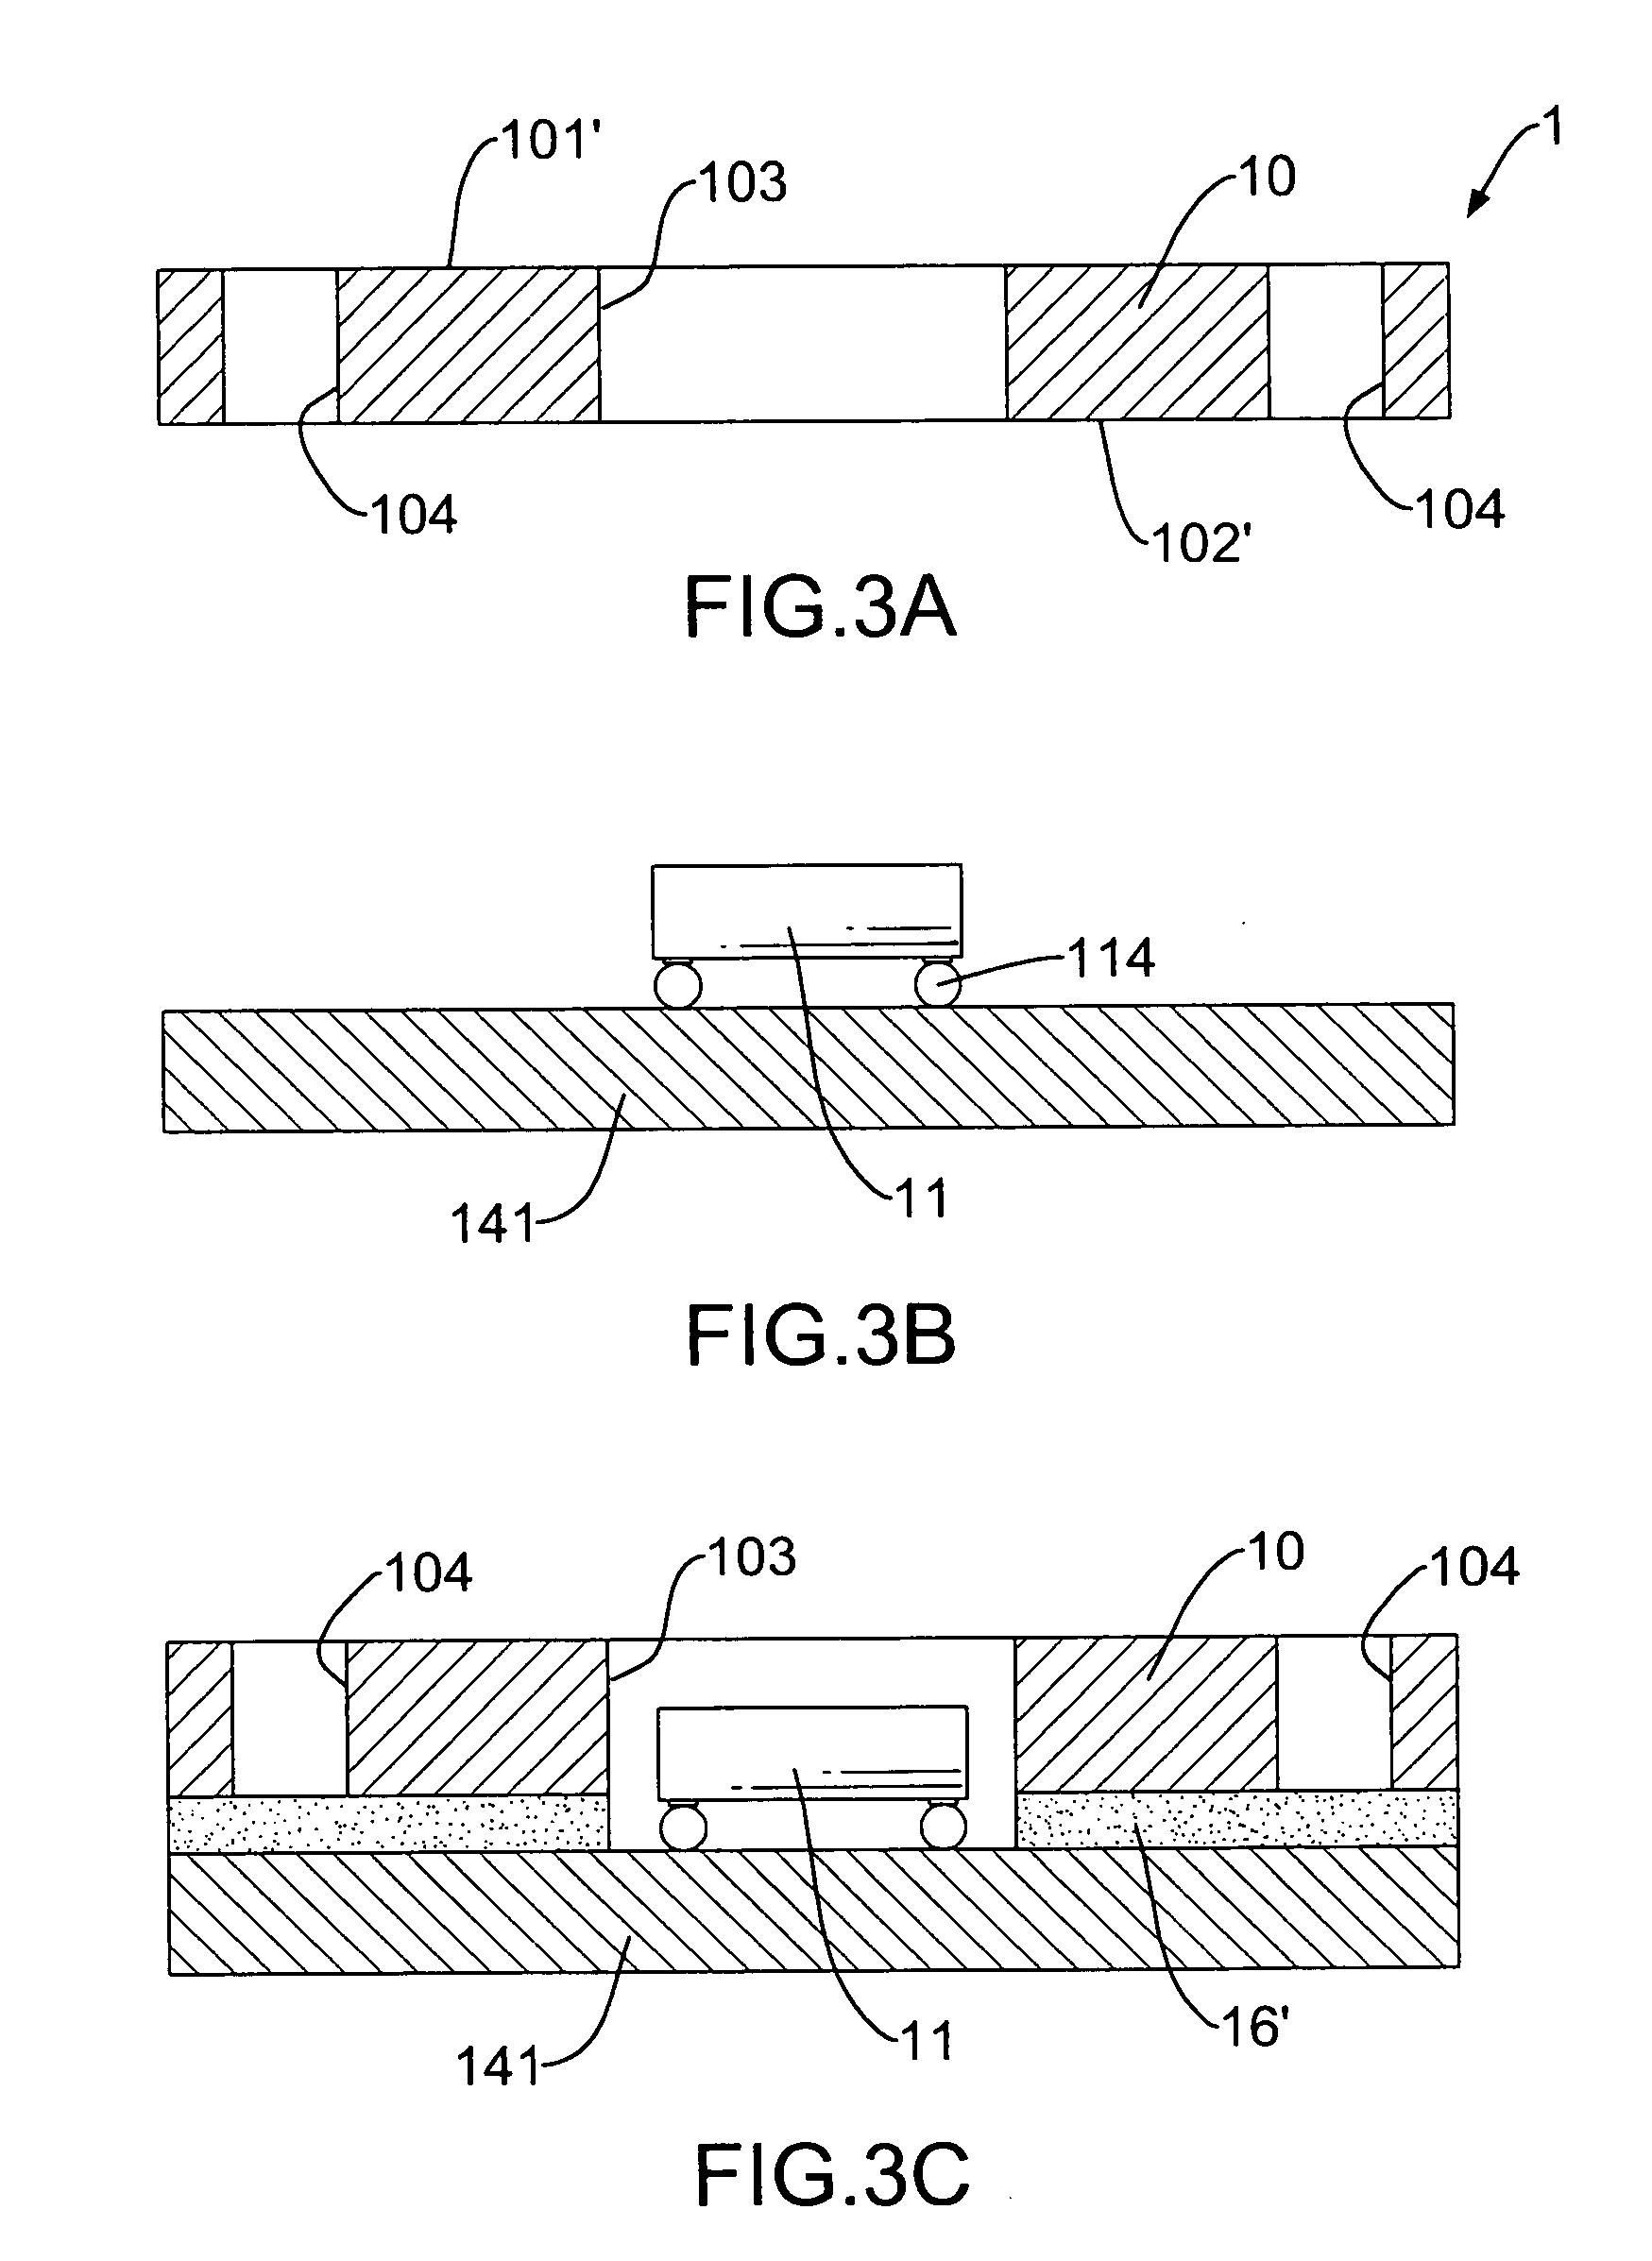 Embedded chip semiconductor having dual electronic connection faces